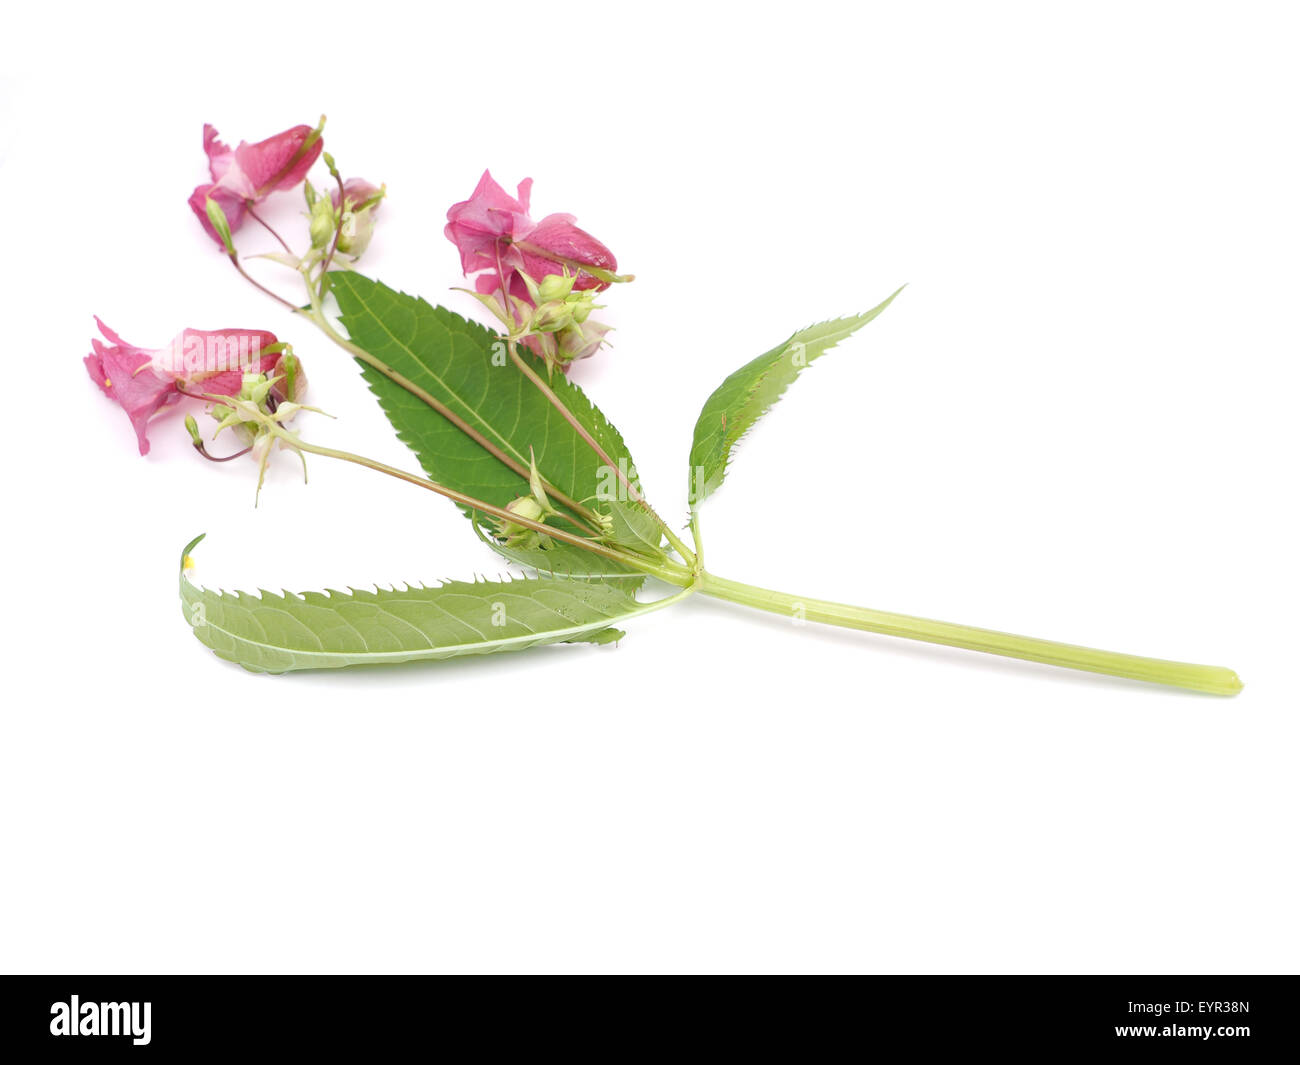 balsam flowers on a white background Stock Photo